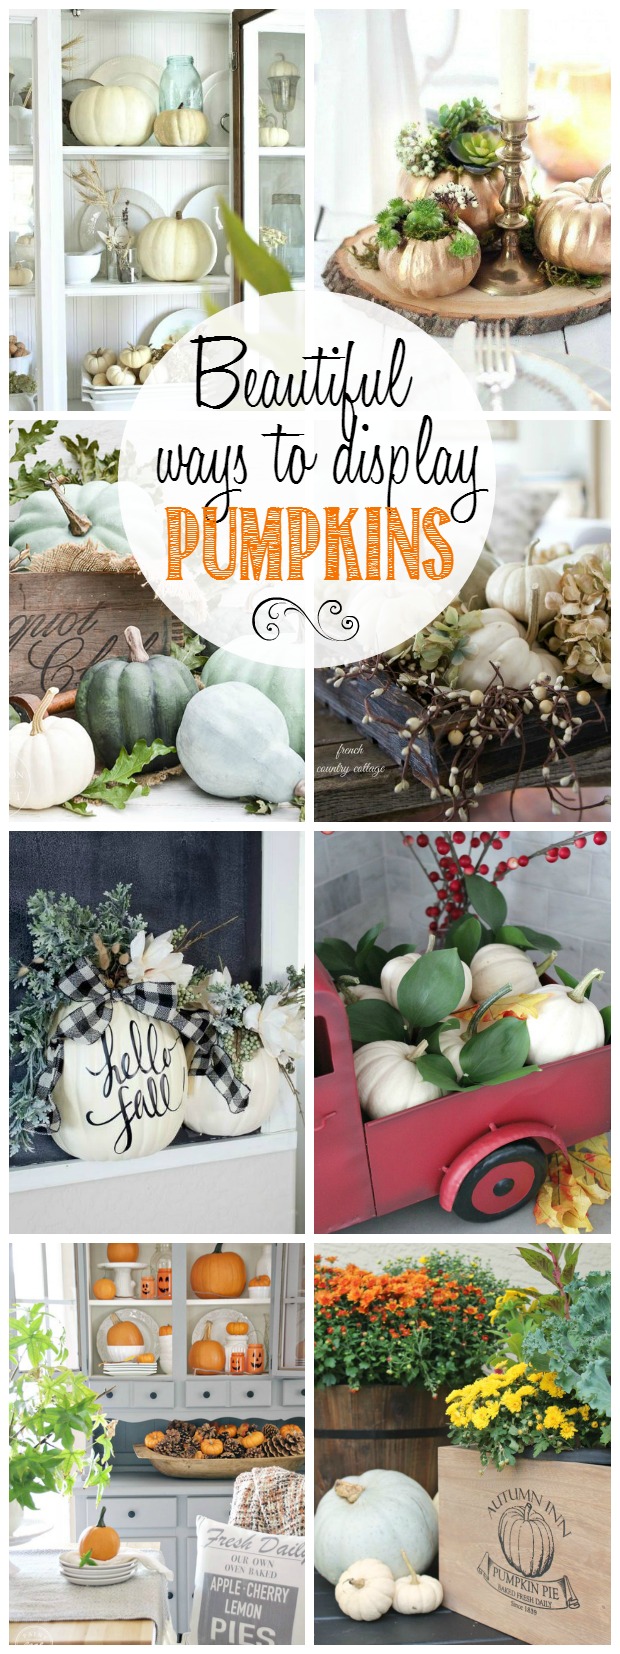 Decorating With Pumpkins - Clean and Scentsible